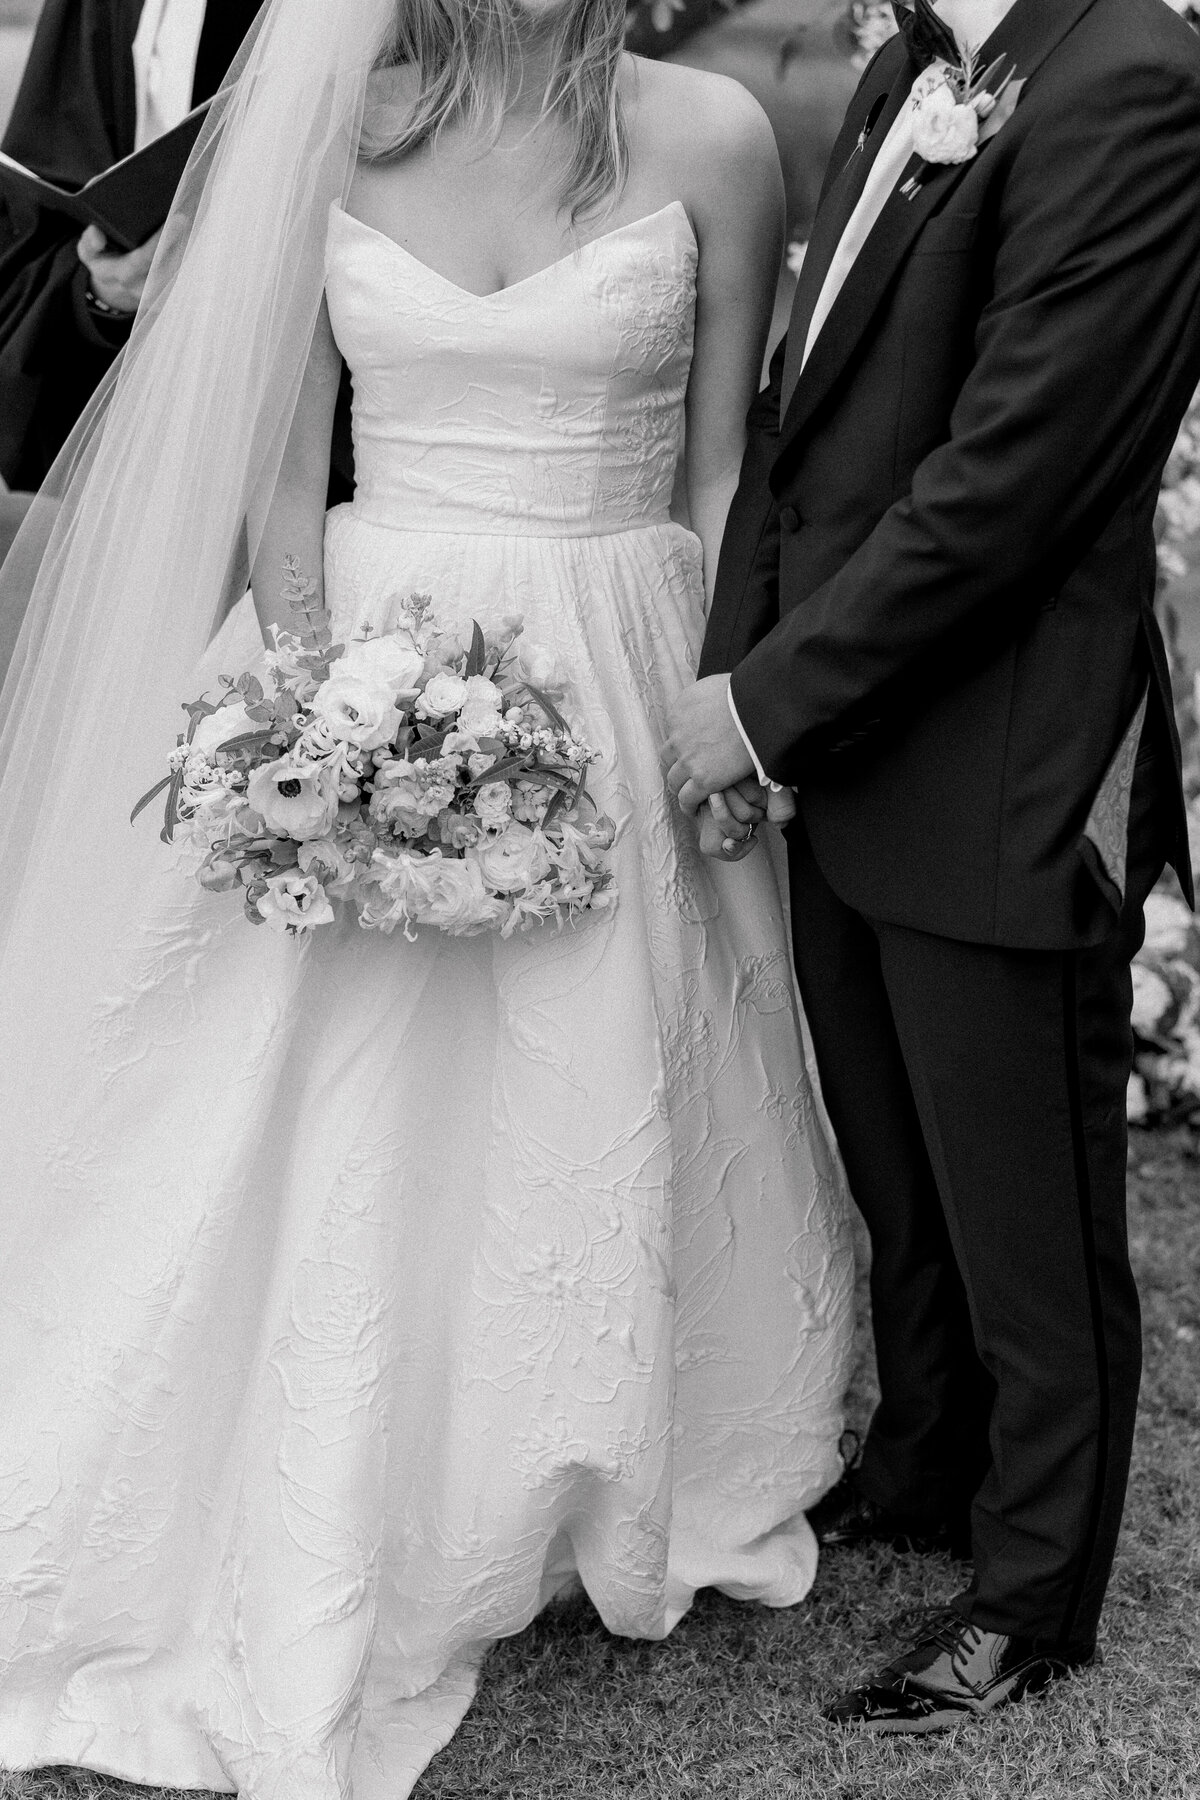 Intimate black and white photo of bride and  groom holding hands during wedding ceremony. Black and white photo. Kailee DiMeglio Photography. Charleston wedding photographer.